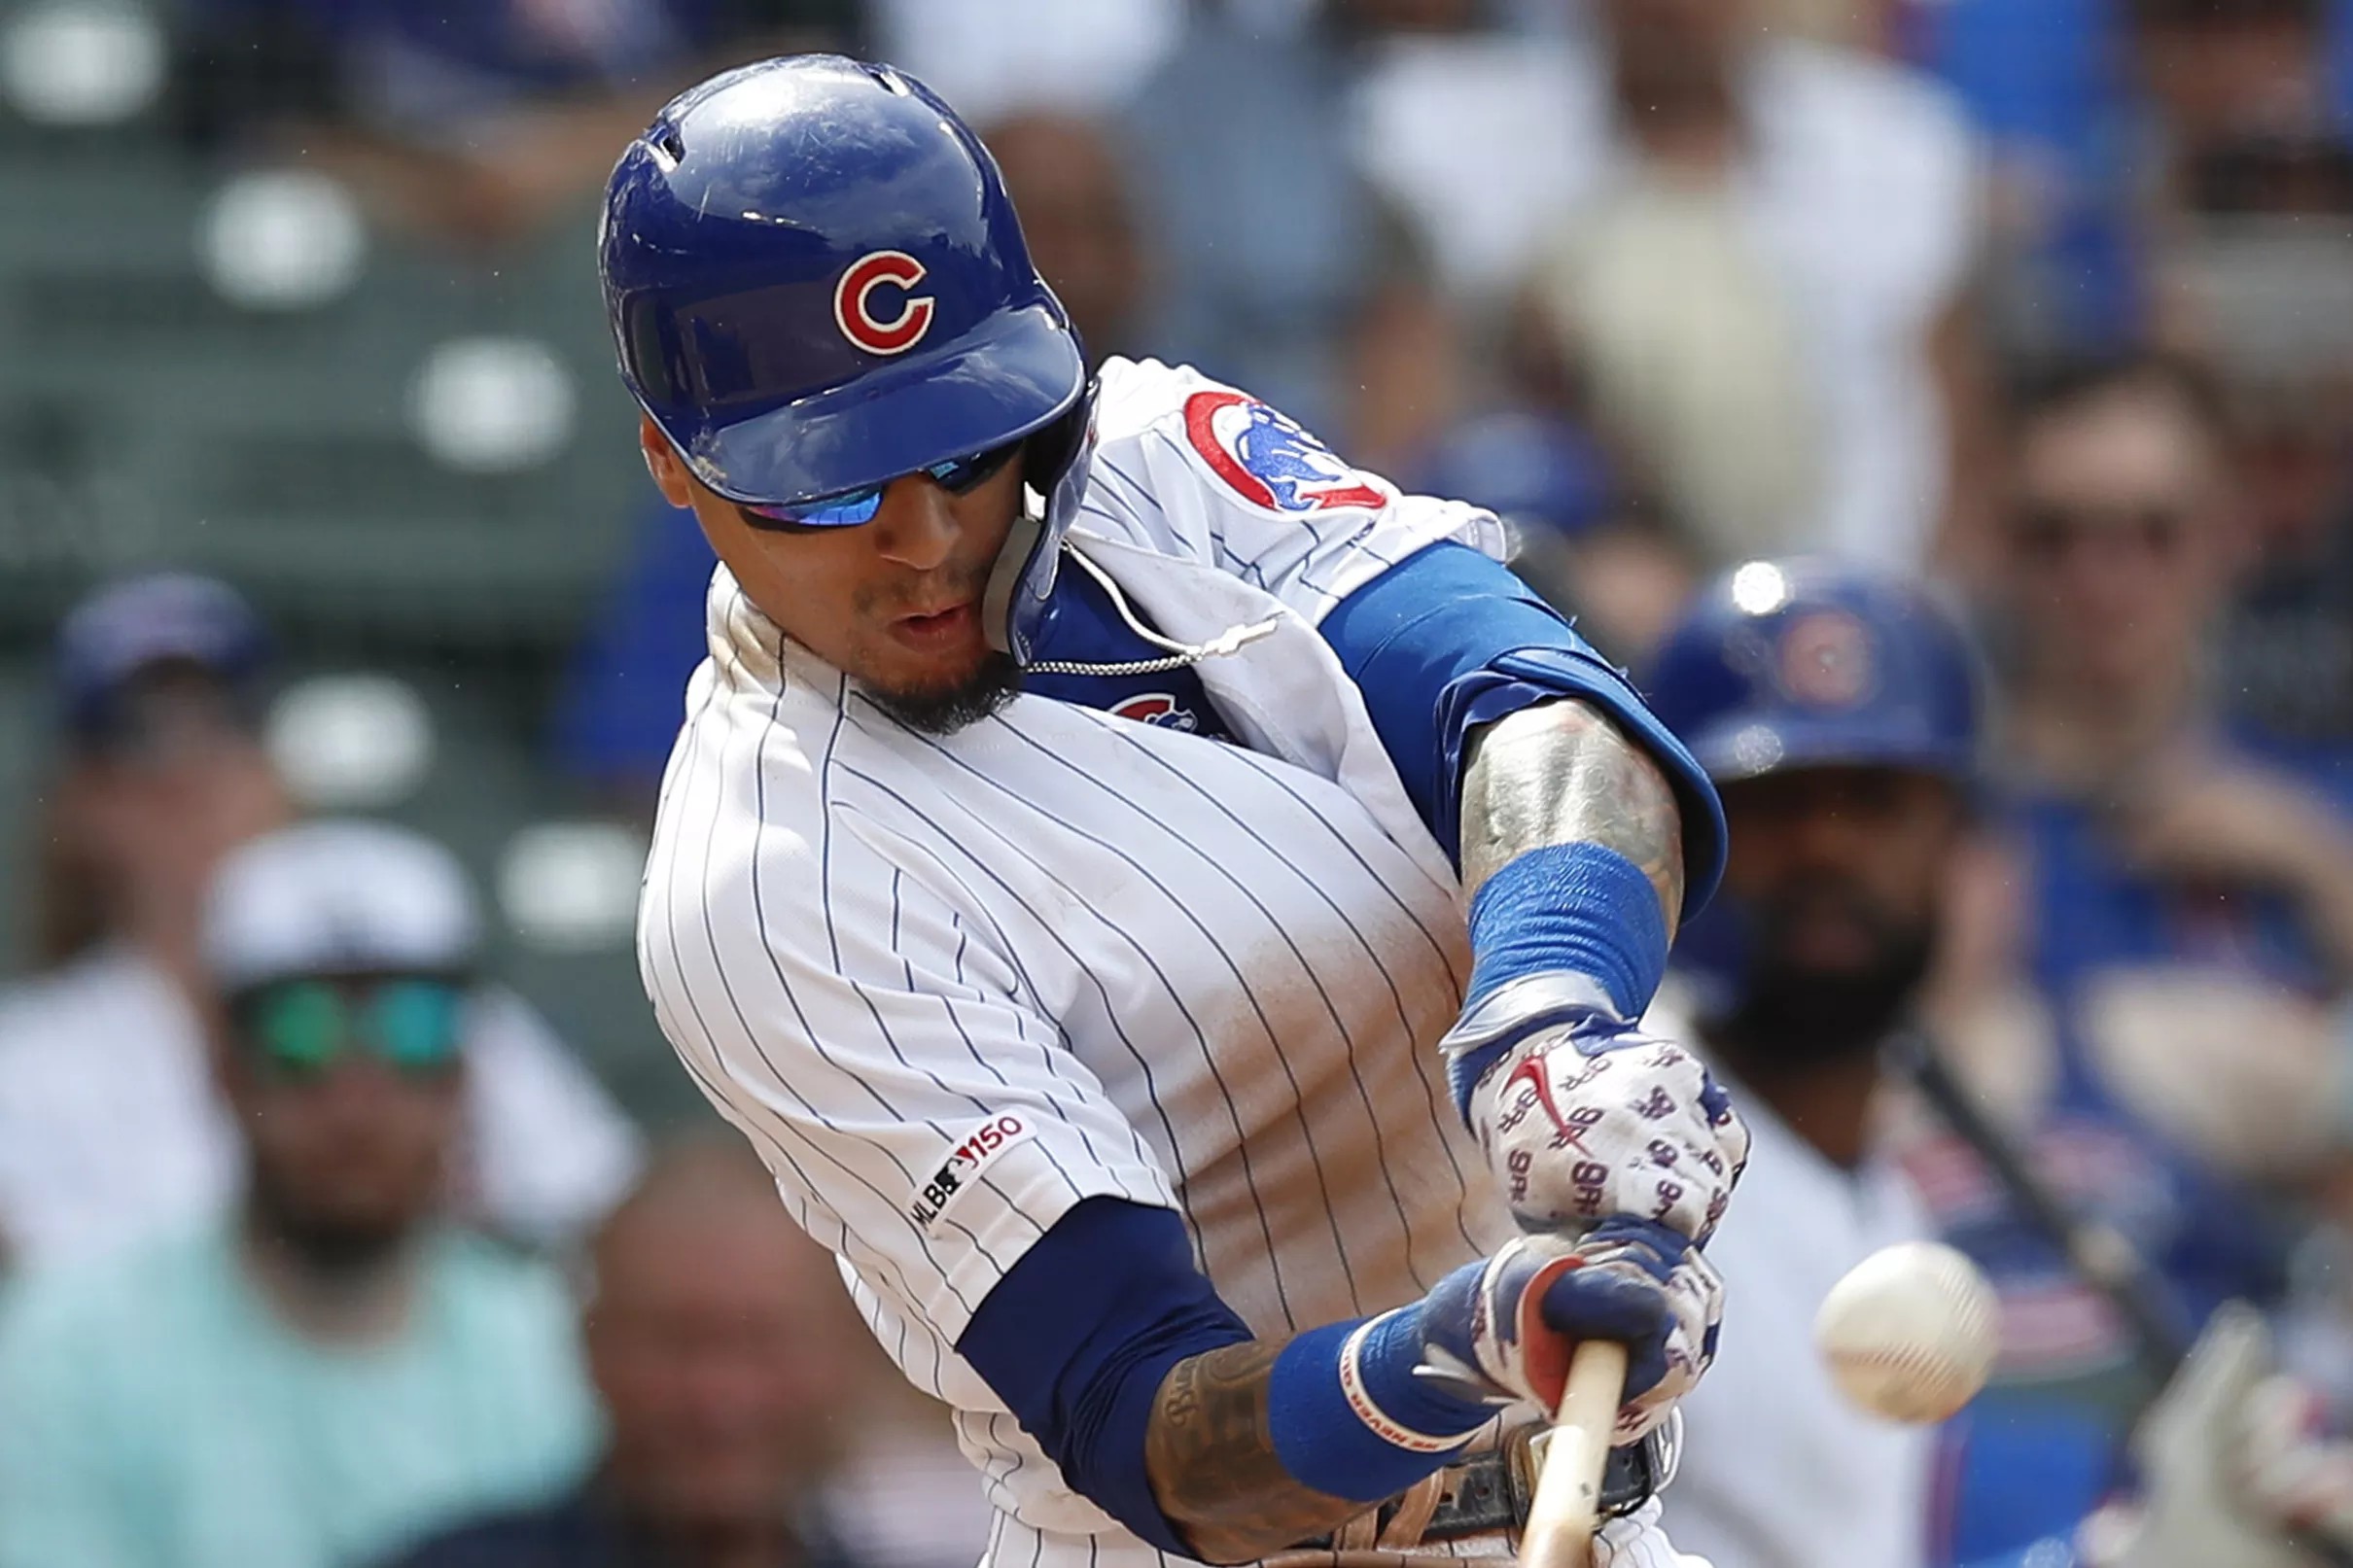 Javier Báez Hit His 100th Home Run Sunday On An 0 2 Pitch